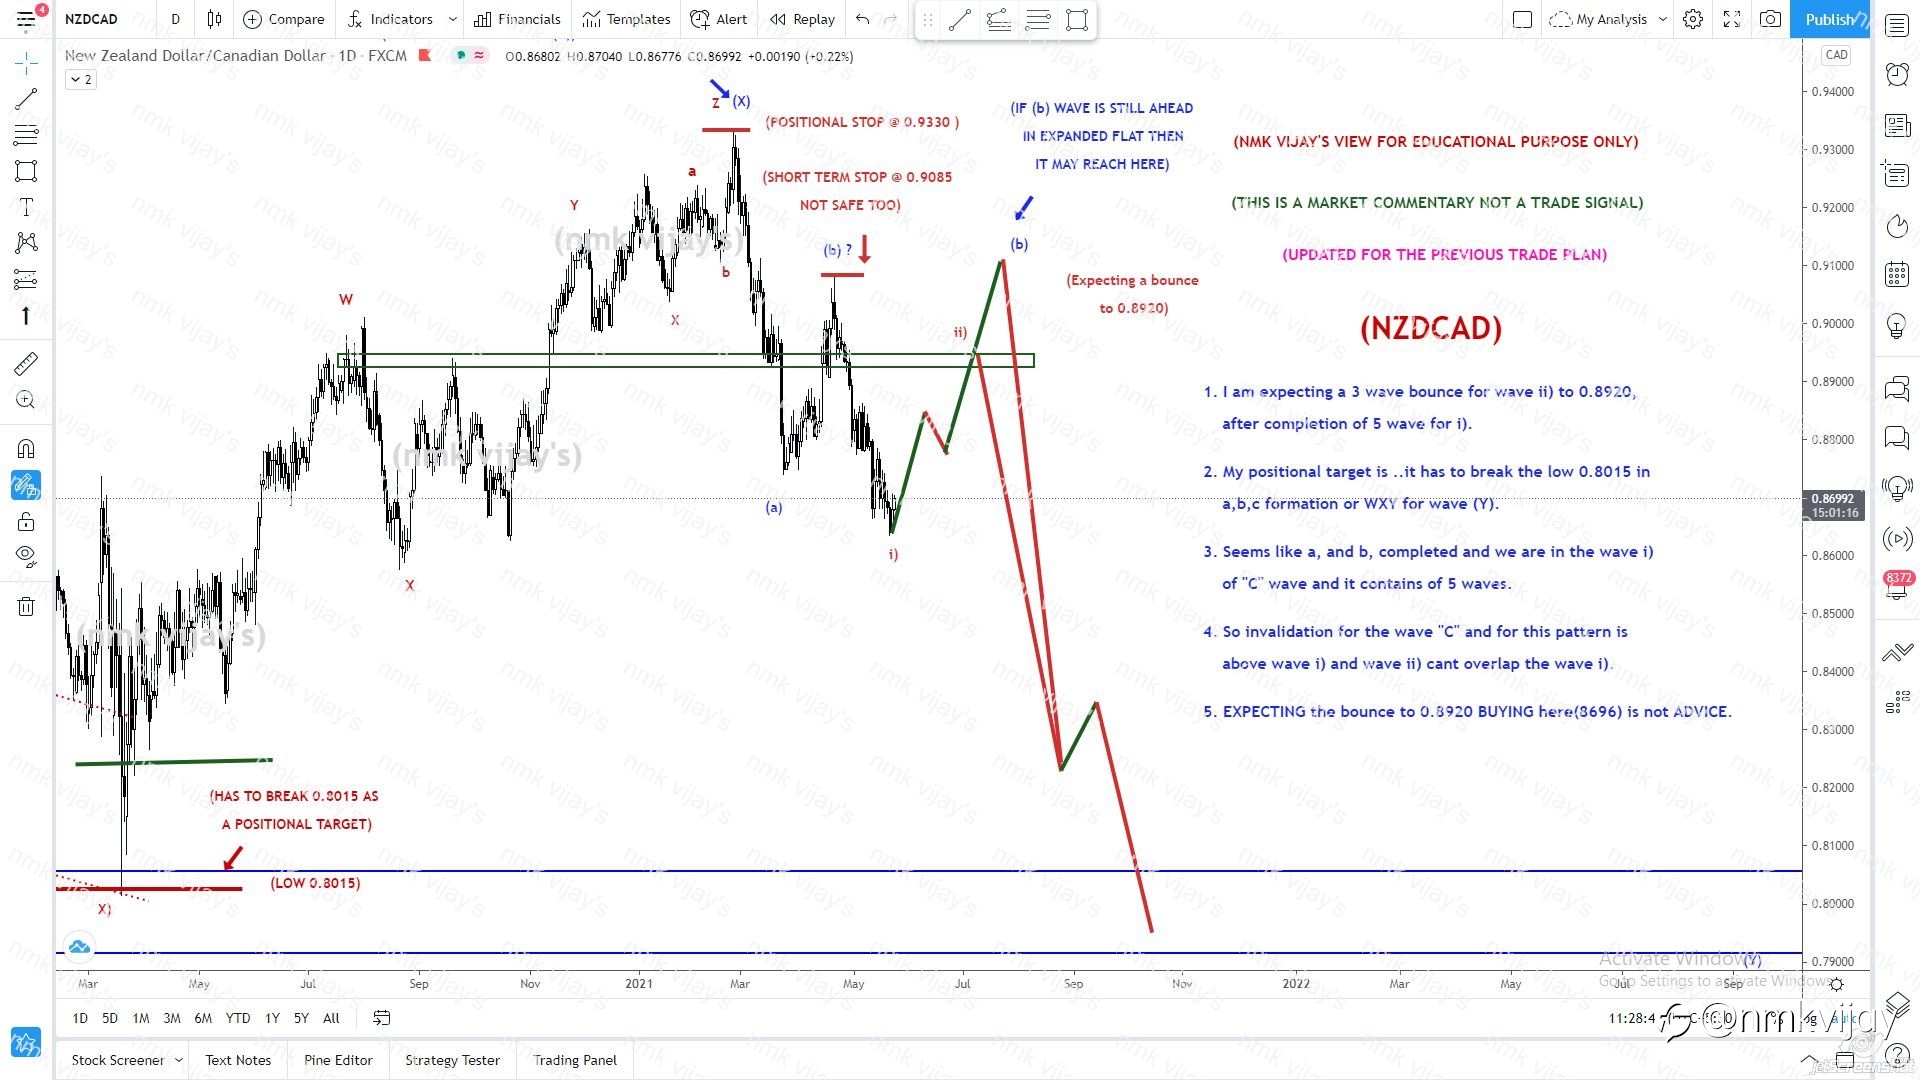 NZDCAD-Expecting a bounce to 0.8920 for wave ii) BUY is not advice here.